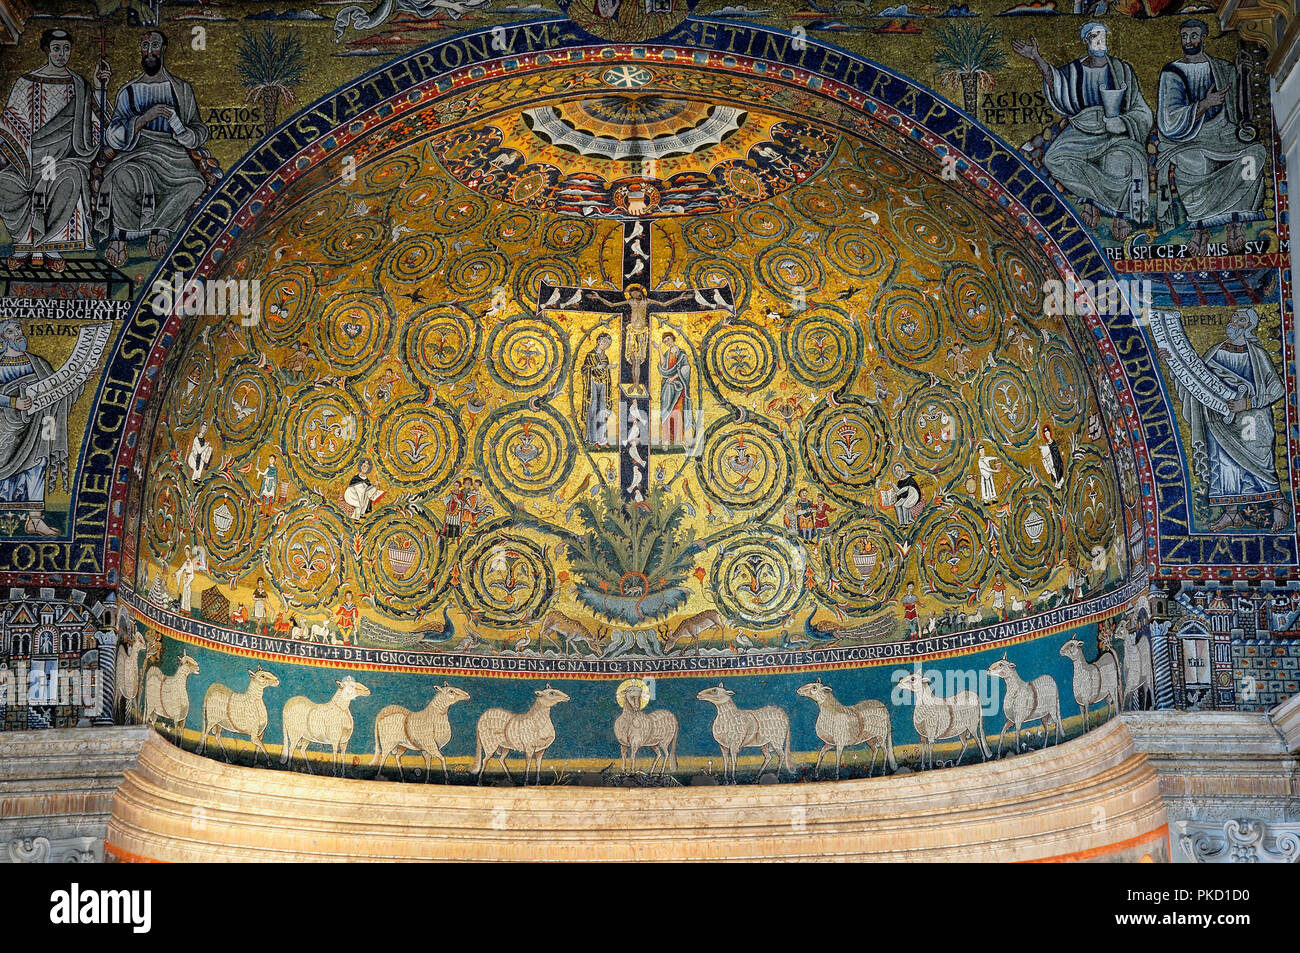 Italy, Lazio, Rome, Basilica of San Clemente, apse with the Tree of Life mosaic. Stock Photo